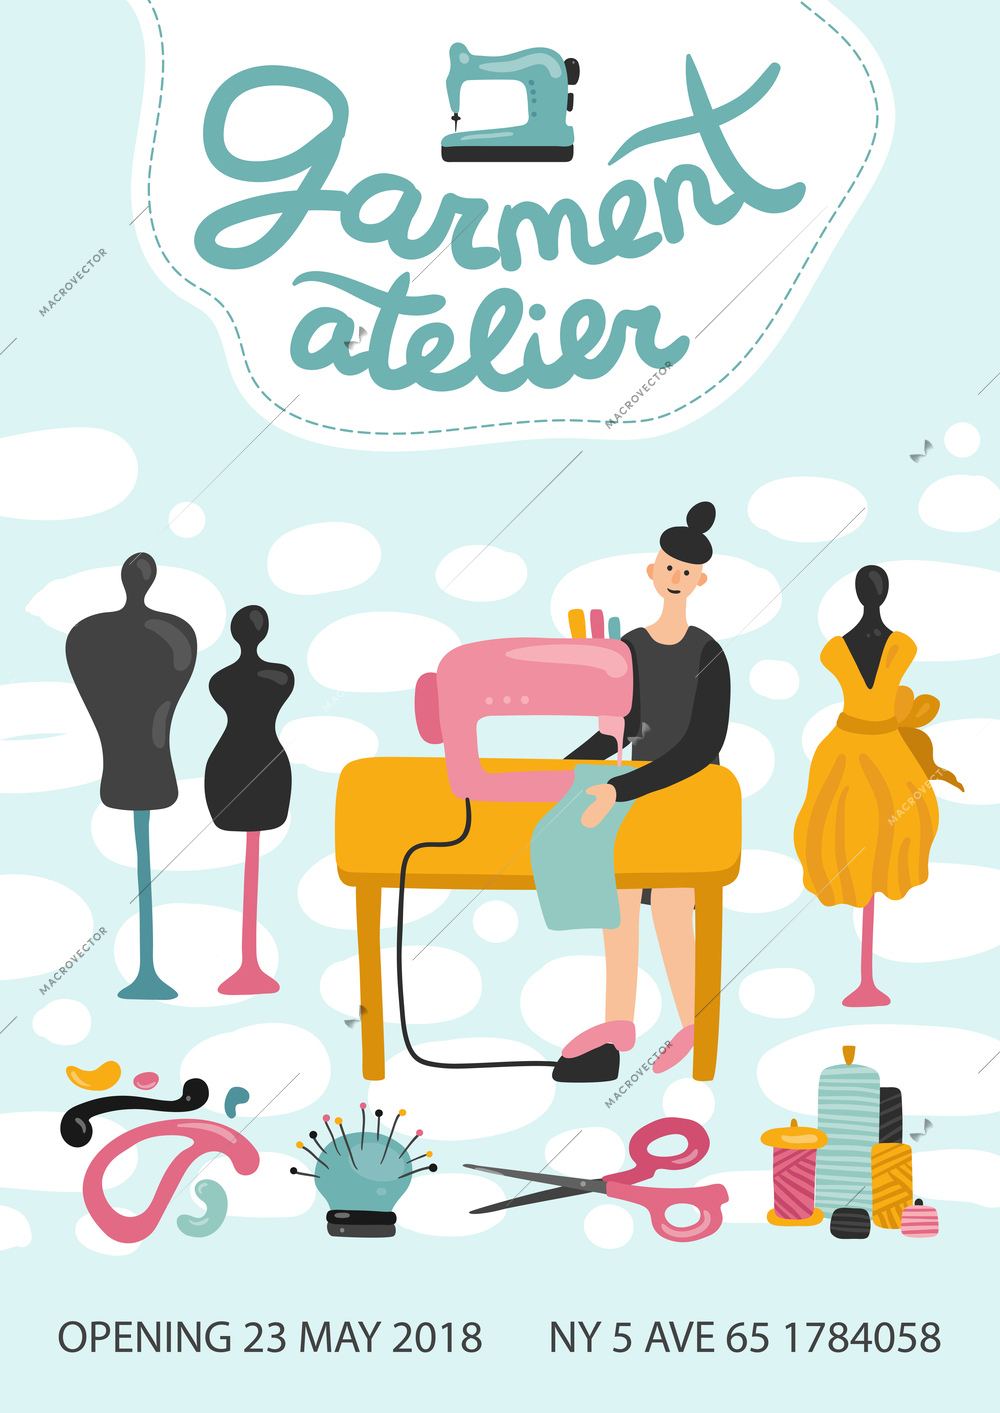 Garment atelier advertising poster with address phone number and opening date flat vector illustration